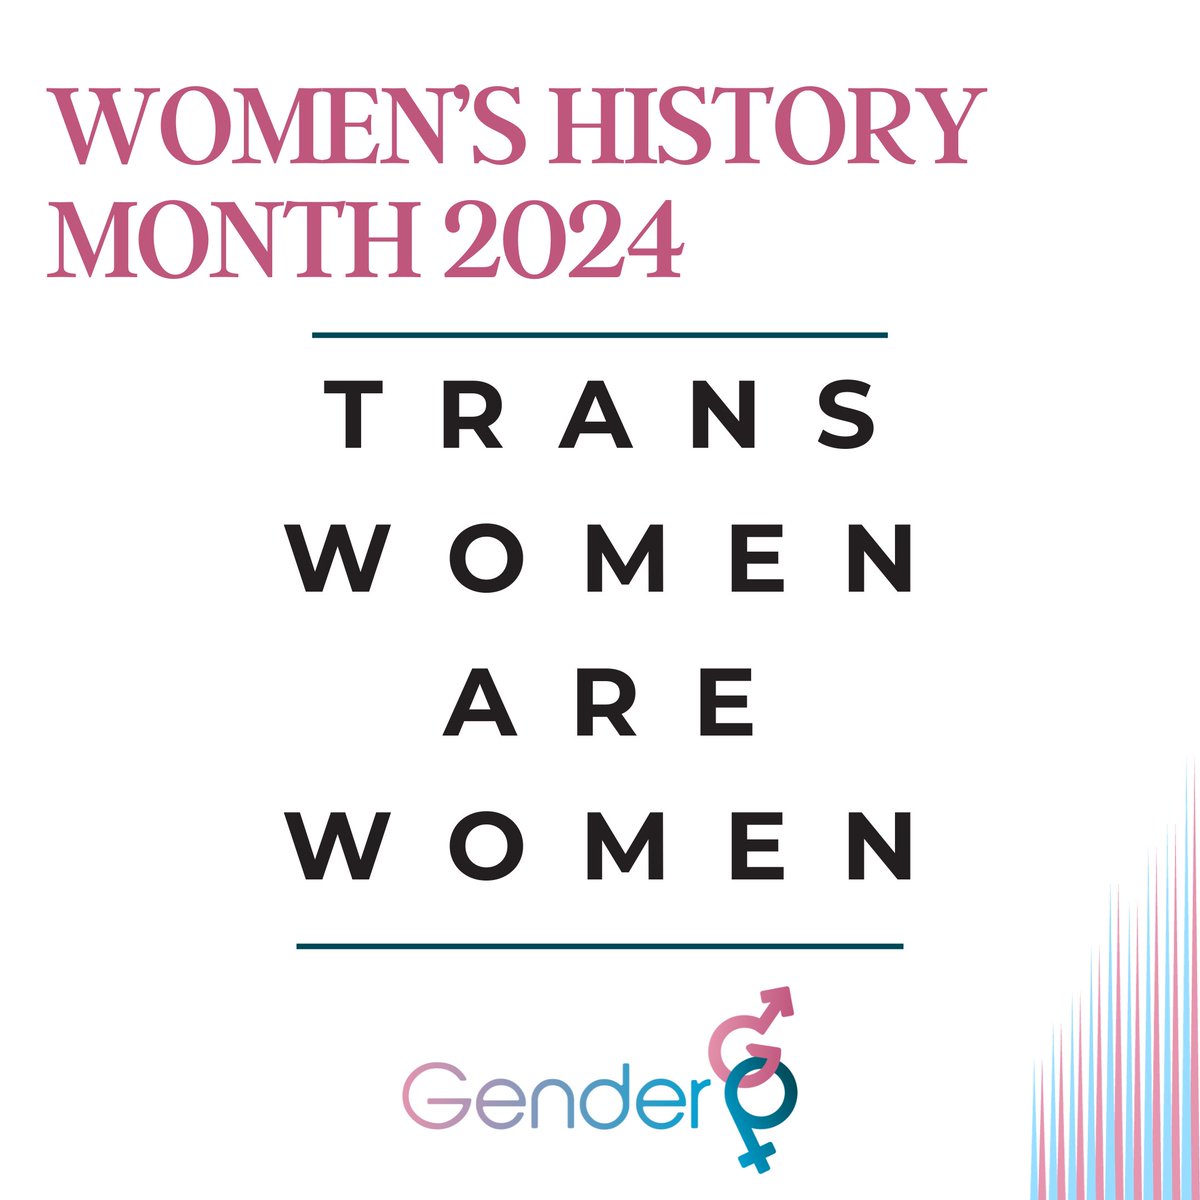 We're sending one single clear message this Women's History Month: Trans women are women That's all 🏳️‍⚧️